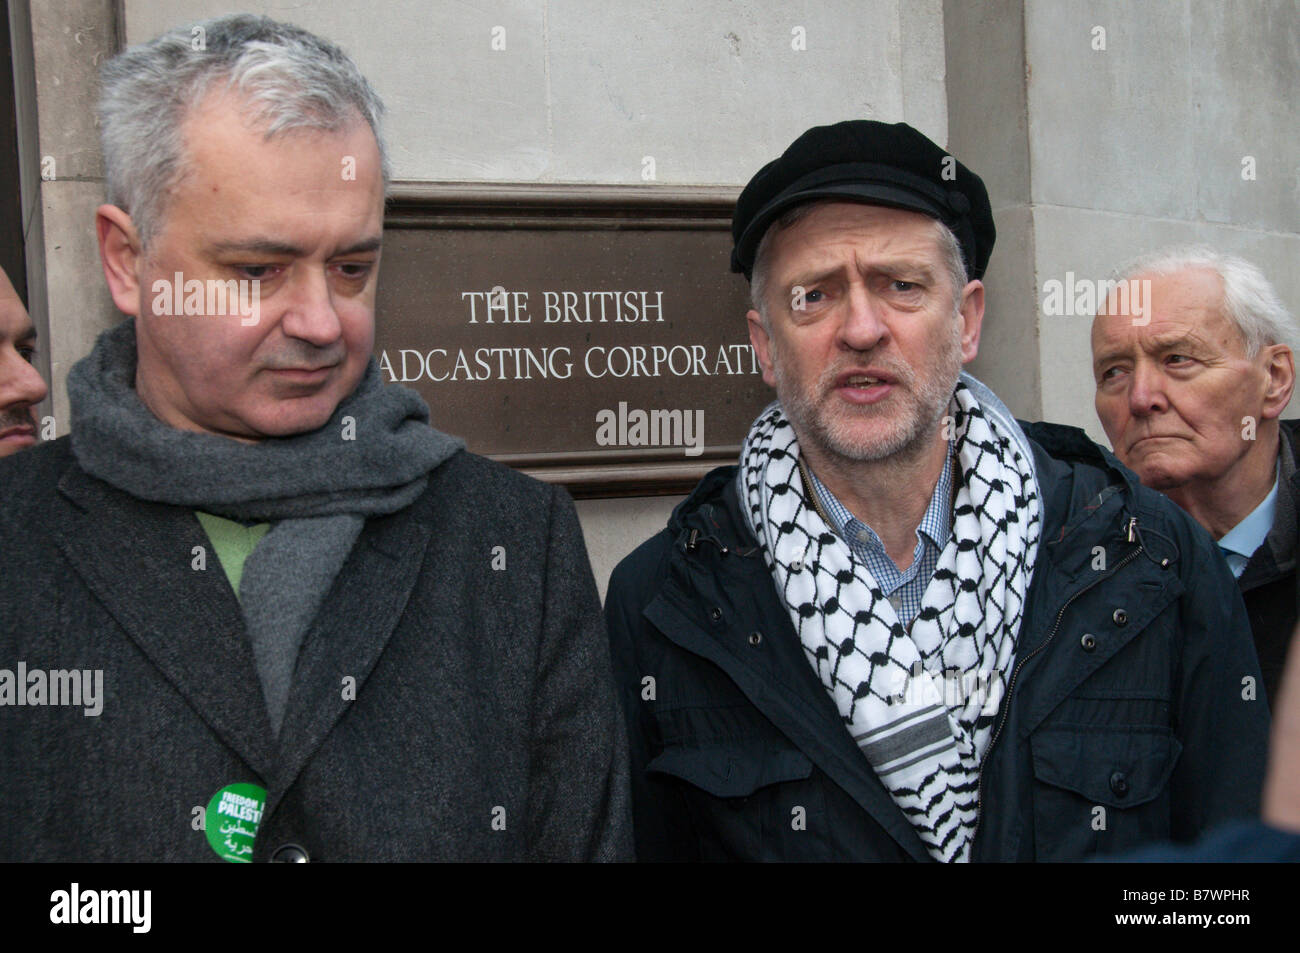 andrew-murray-jeremy-corbyn-and-tony-benn-at-protest-outside-bbc-before-B7WPHR.jpg